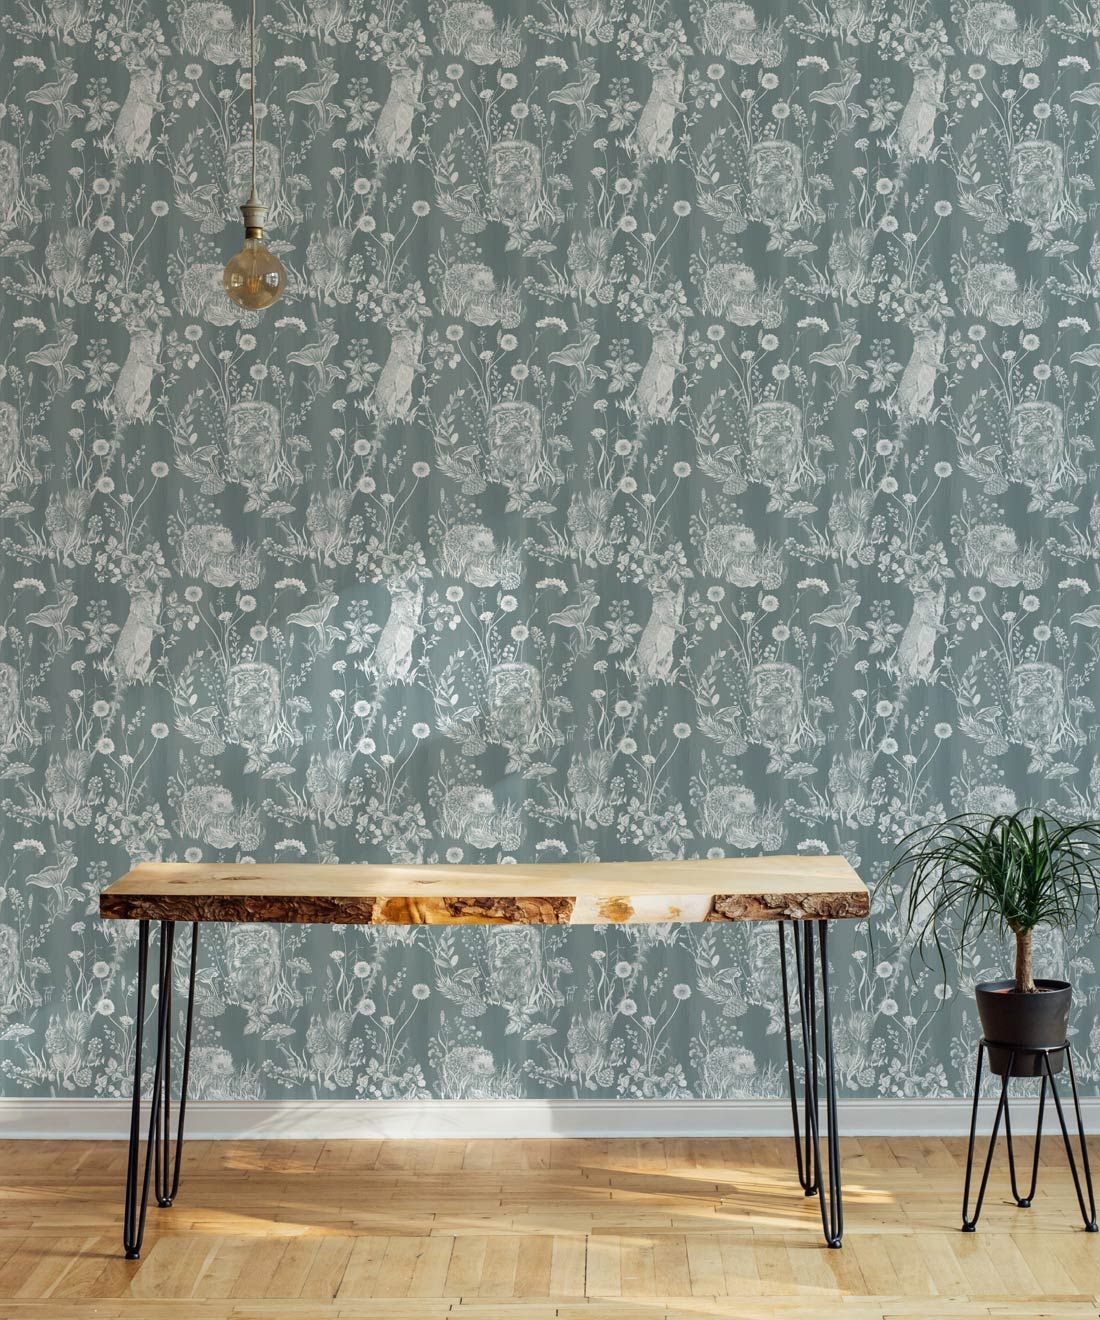 Woodland Friends Wallpaper • Forest Wallpaper with rabbits, hares, raccoons • Iryna Ruggeri • Duck Egg • Insitu